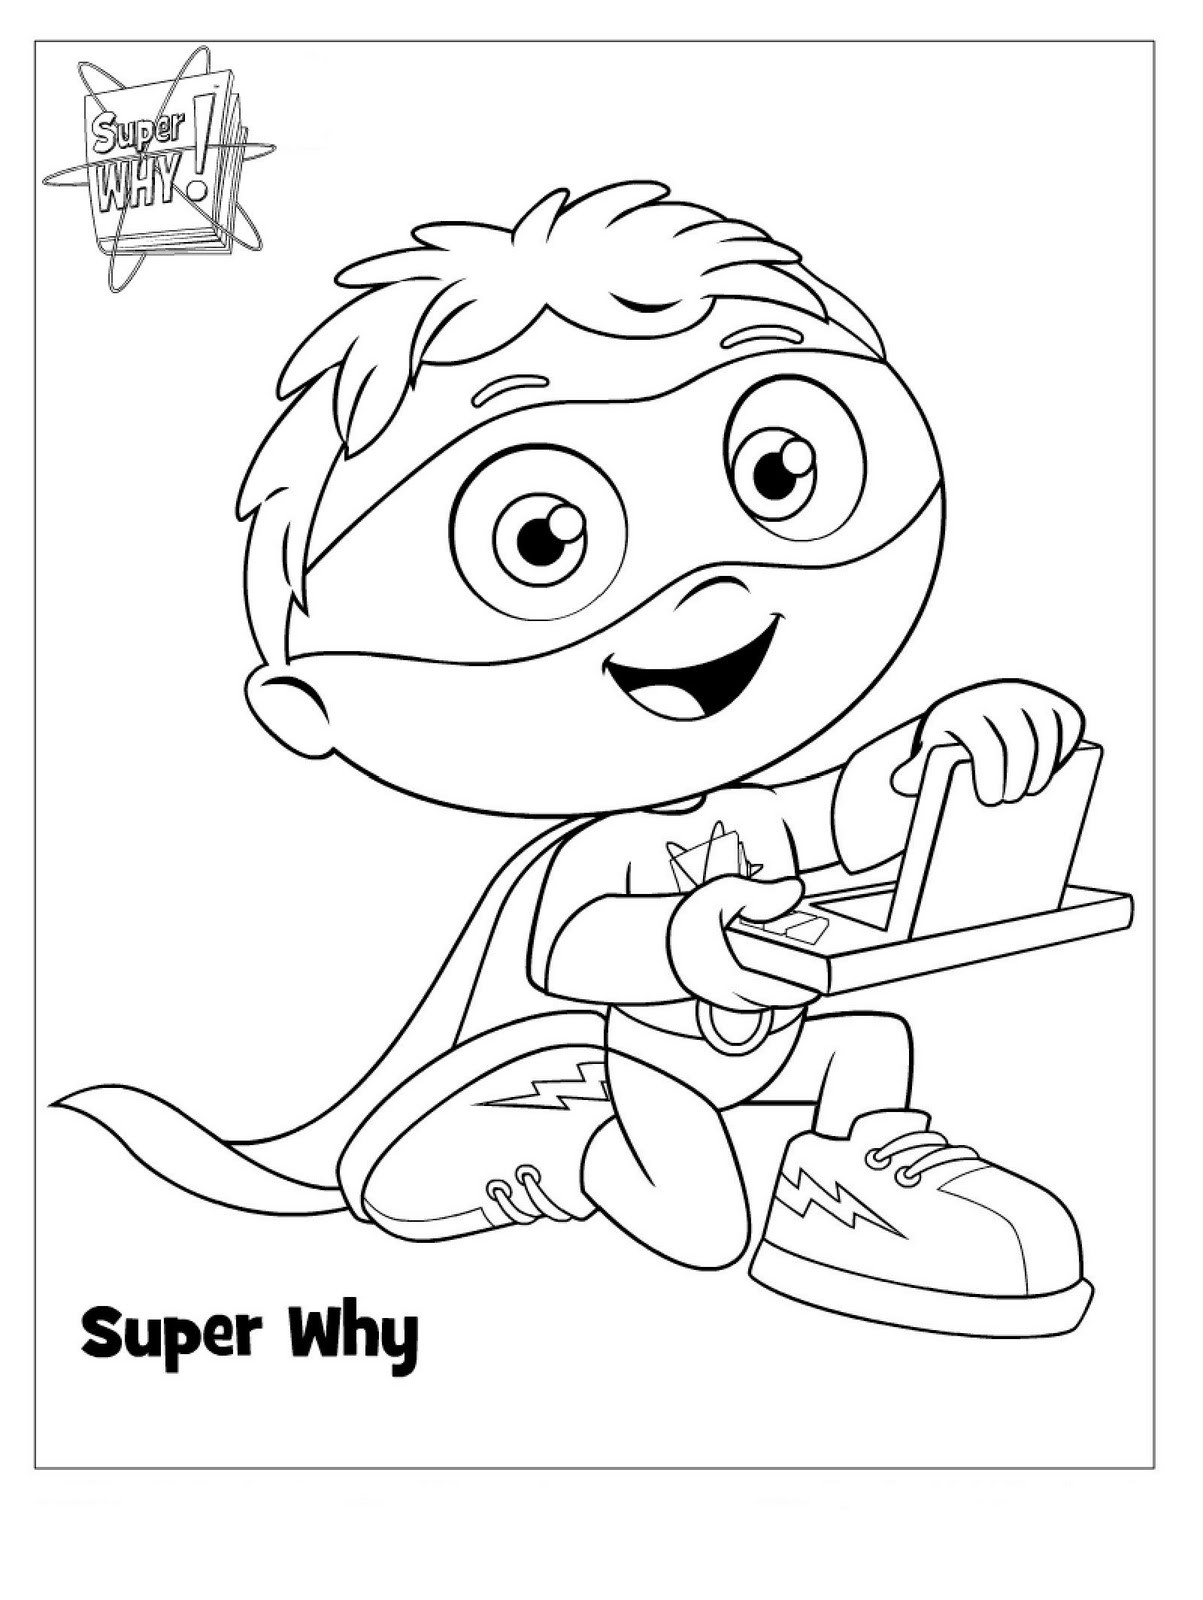 Coloring Sheet For Toddlers
 Super Why Coloring Pages Best Coloring Pages For Kids